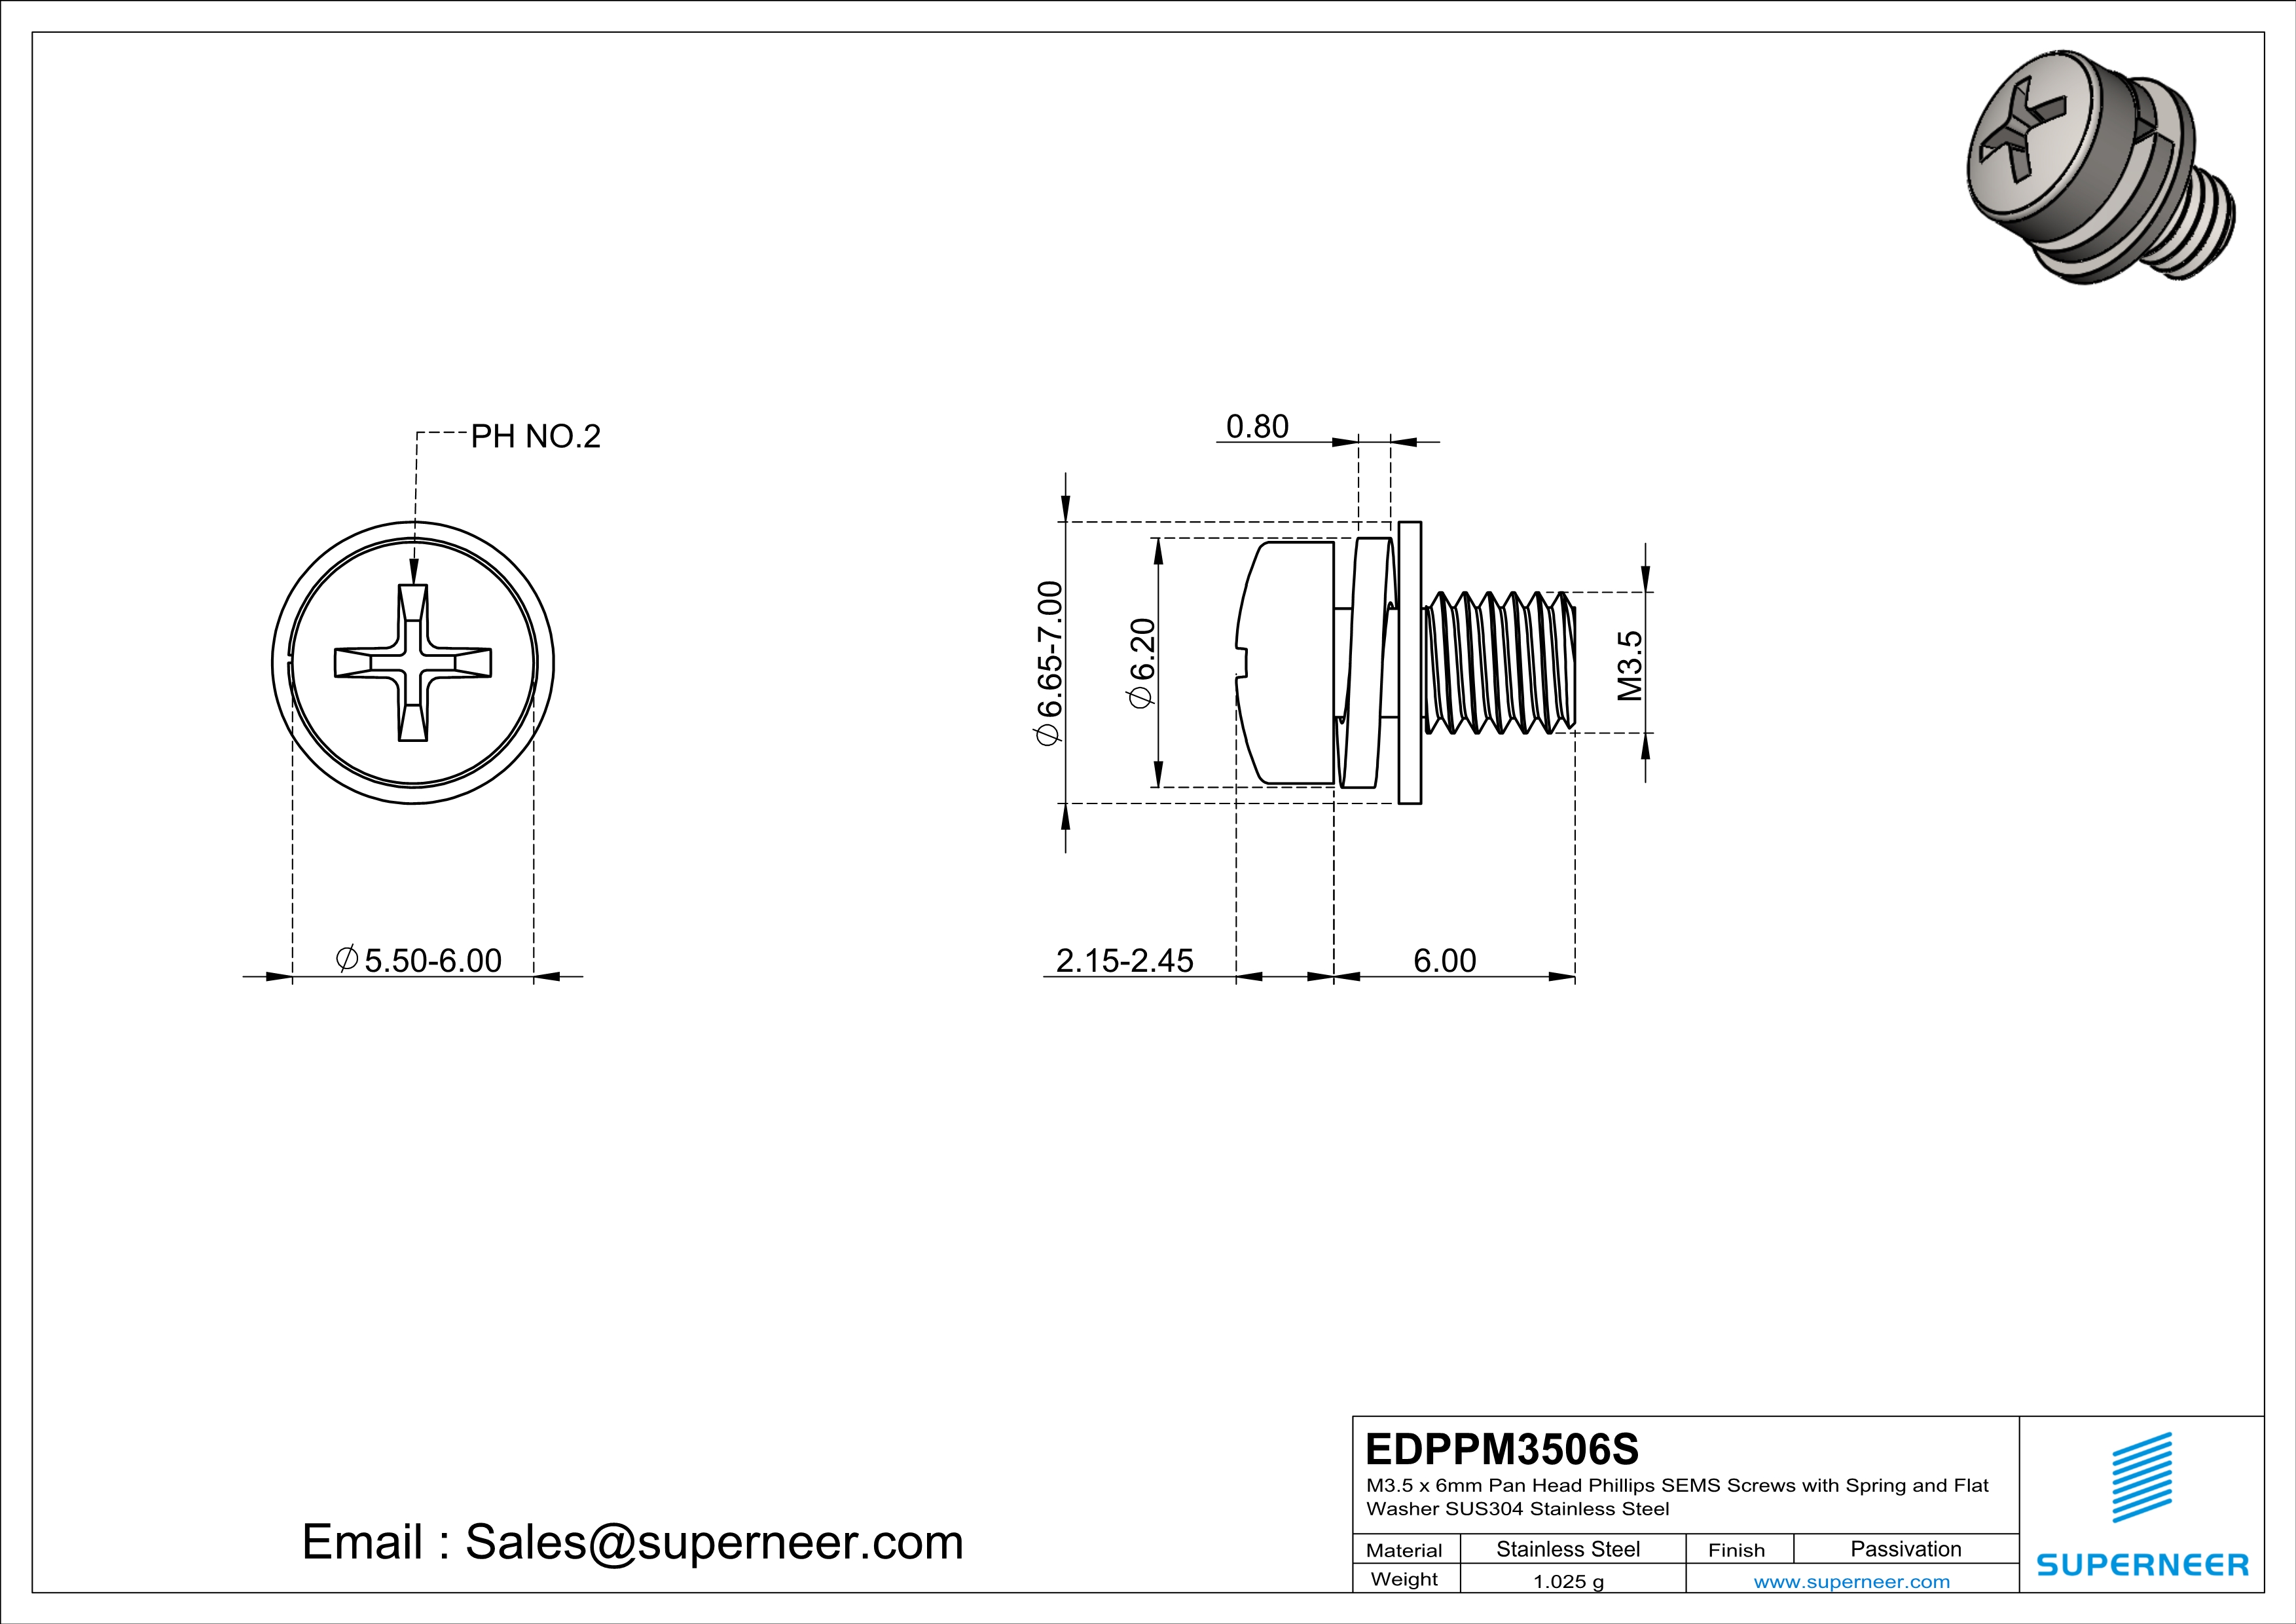 M3.5 x 6mm Pan Head Phillips SEMS Screws with Spring and Flat Washer SUS304 Stainless Steel Inox